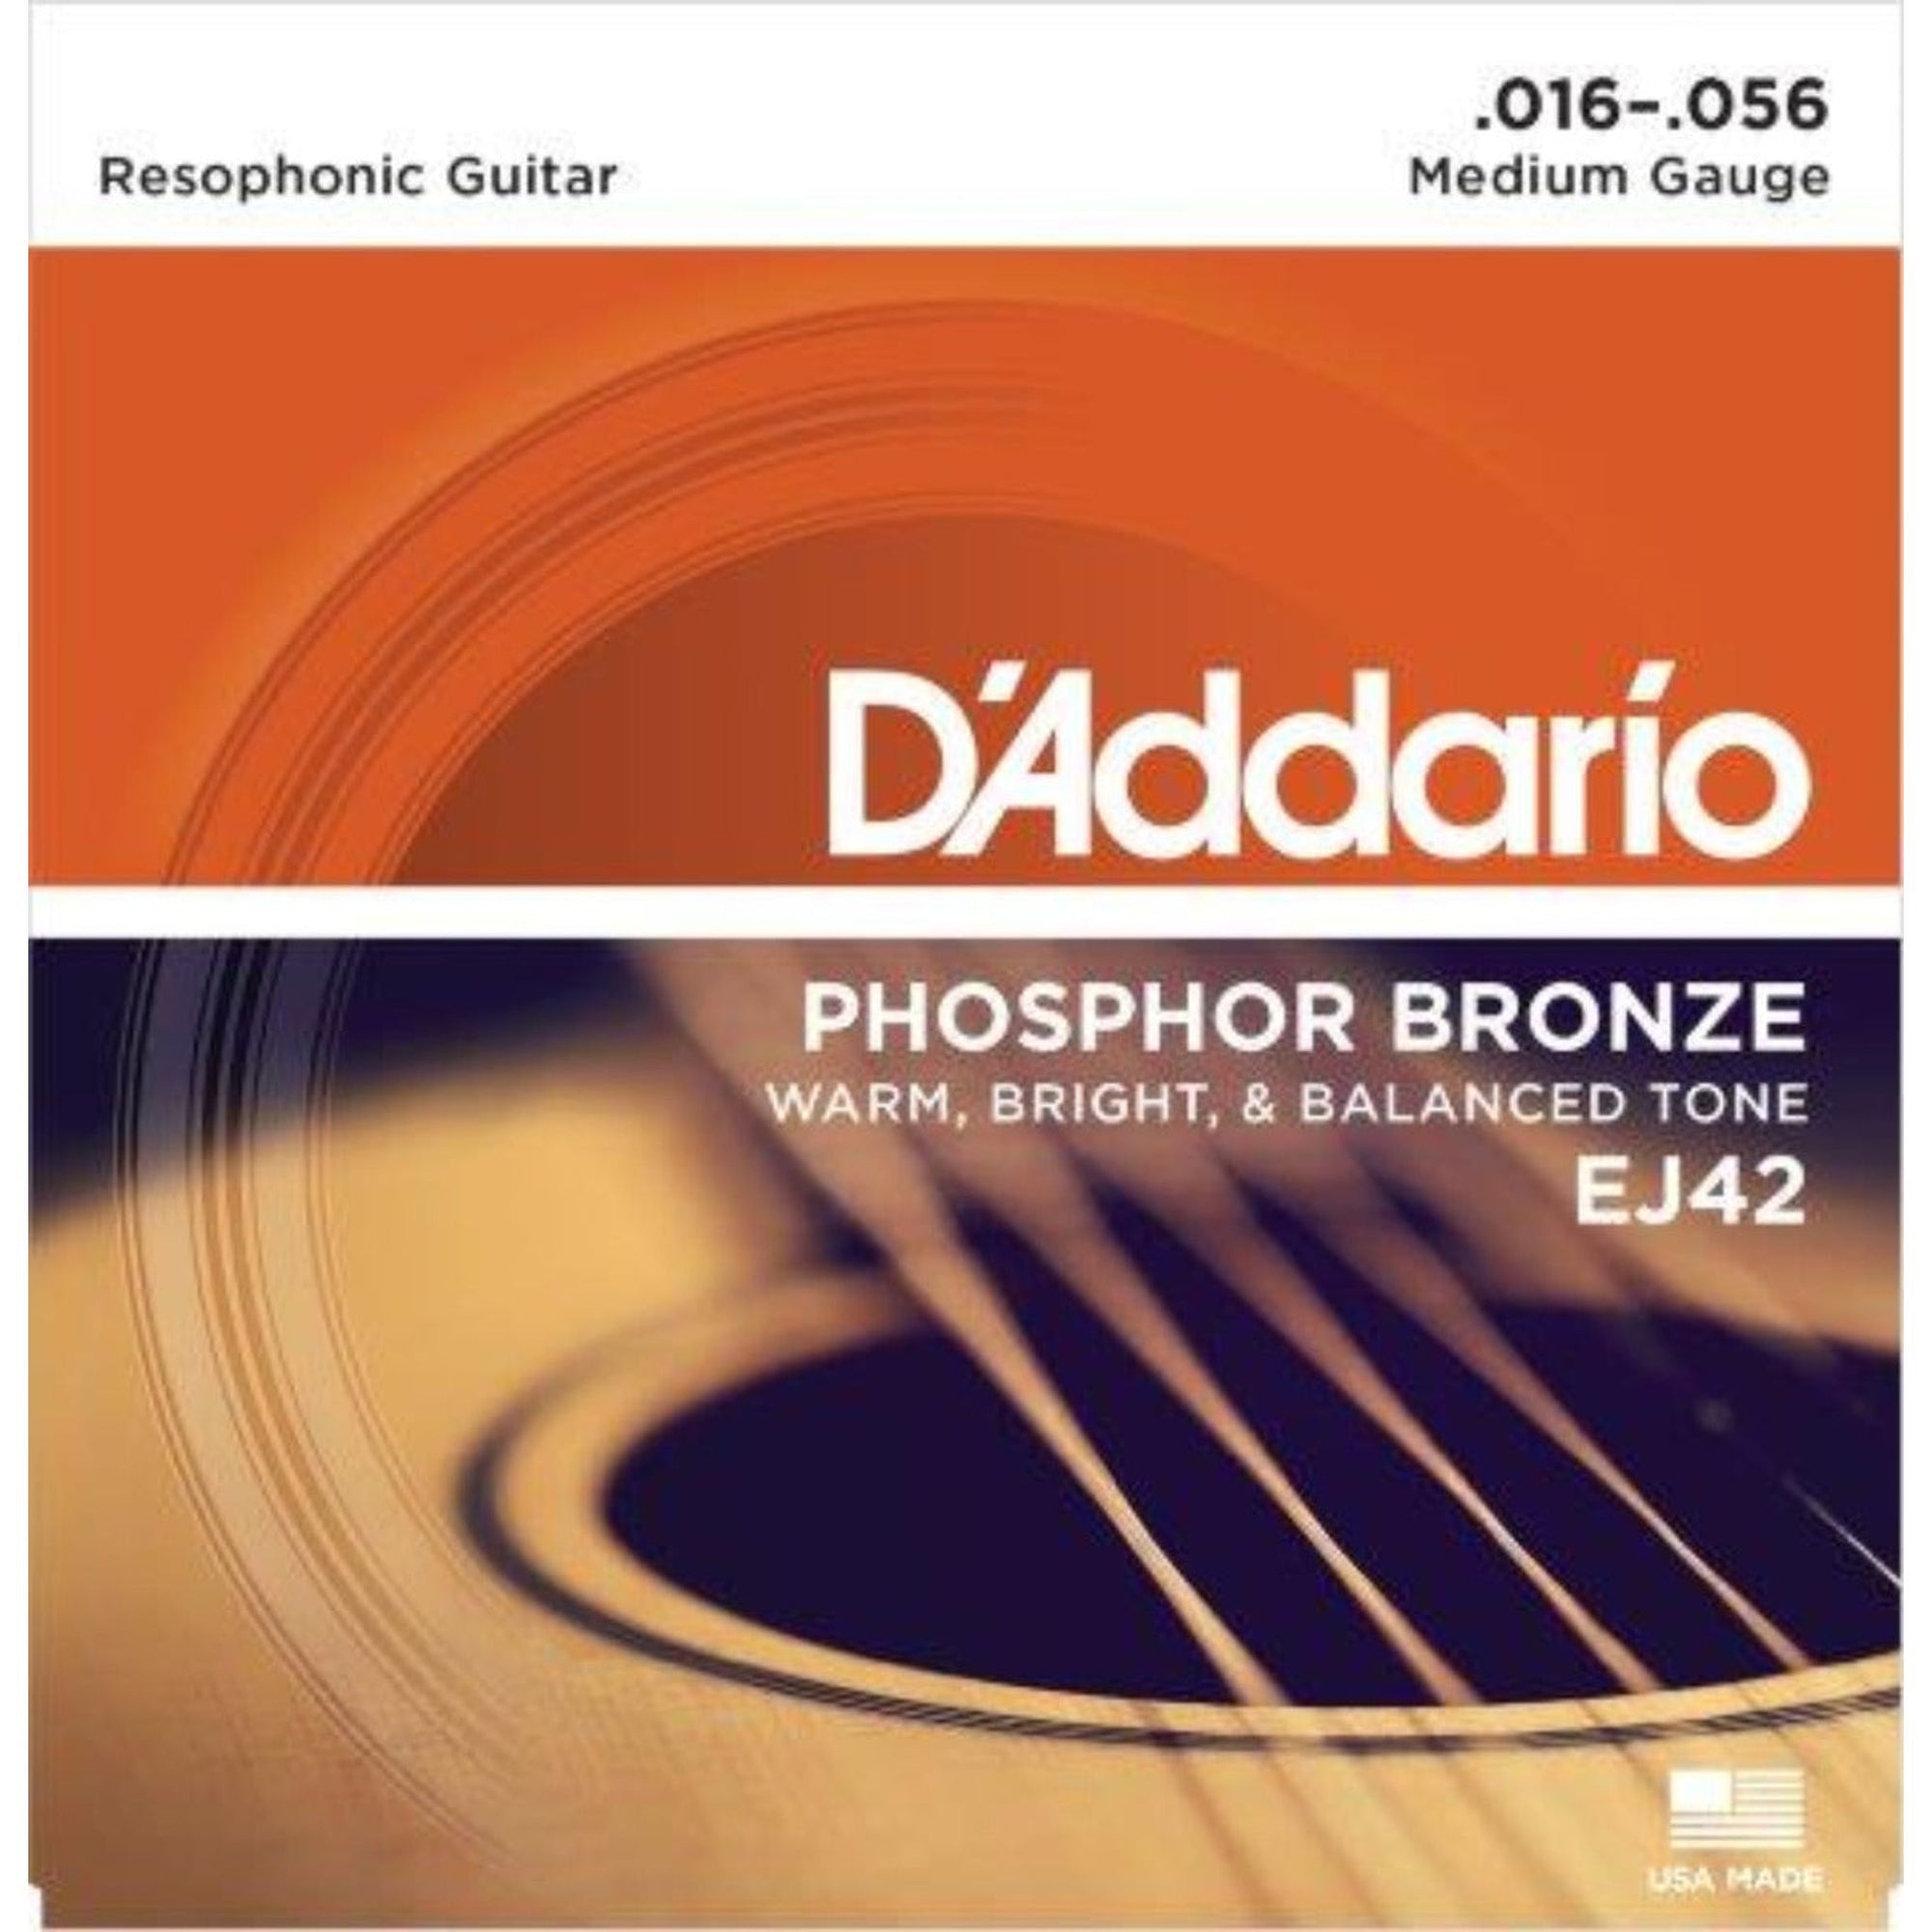 The D'Addario EJ42 Resonator Guitar 6-string phosphor bronze Resophonic guitar strings offer a warm, well balanced acoustic tone, optimal resistance and comfortable feel.